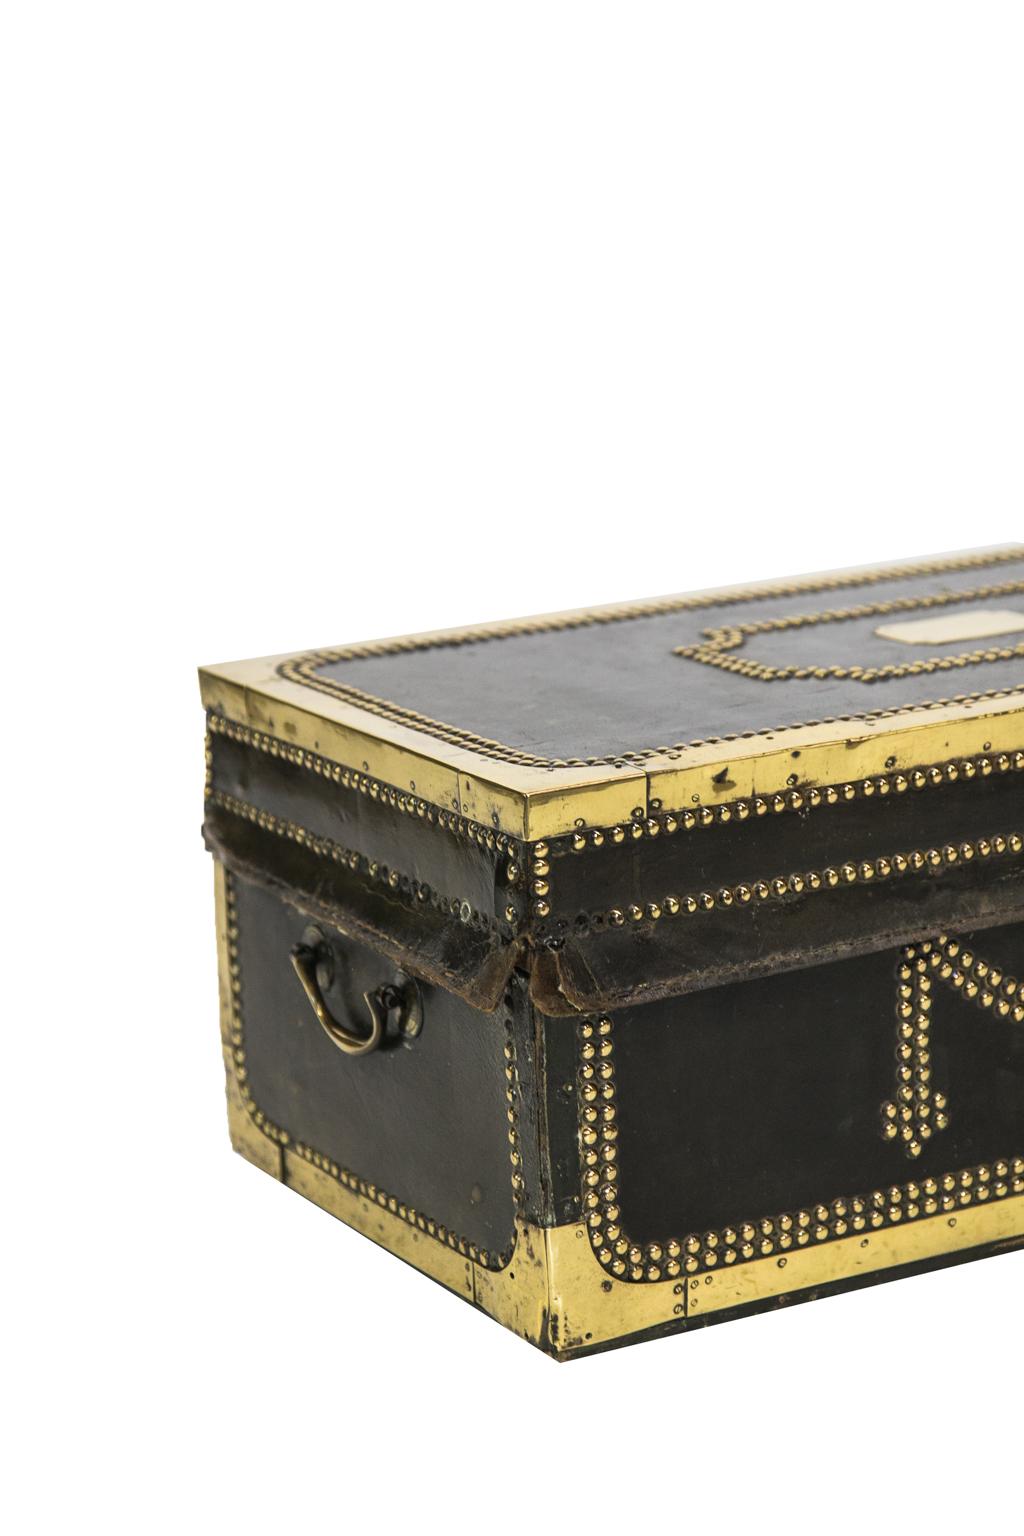 English camphor wood trunk is overlaid with leather and bound with brass strapping and stud work. Some studs are missing.
   